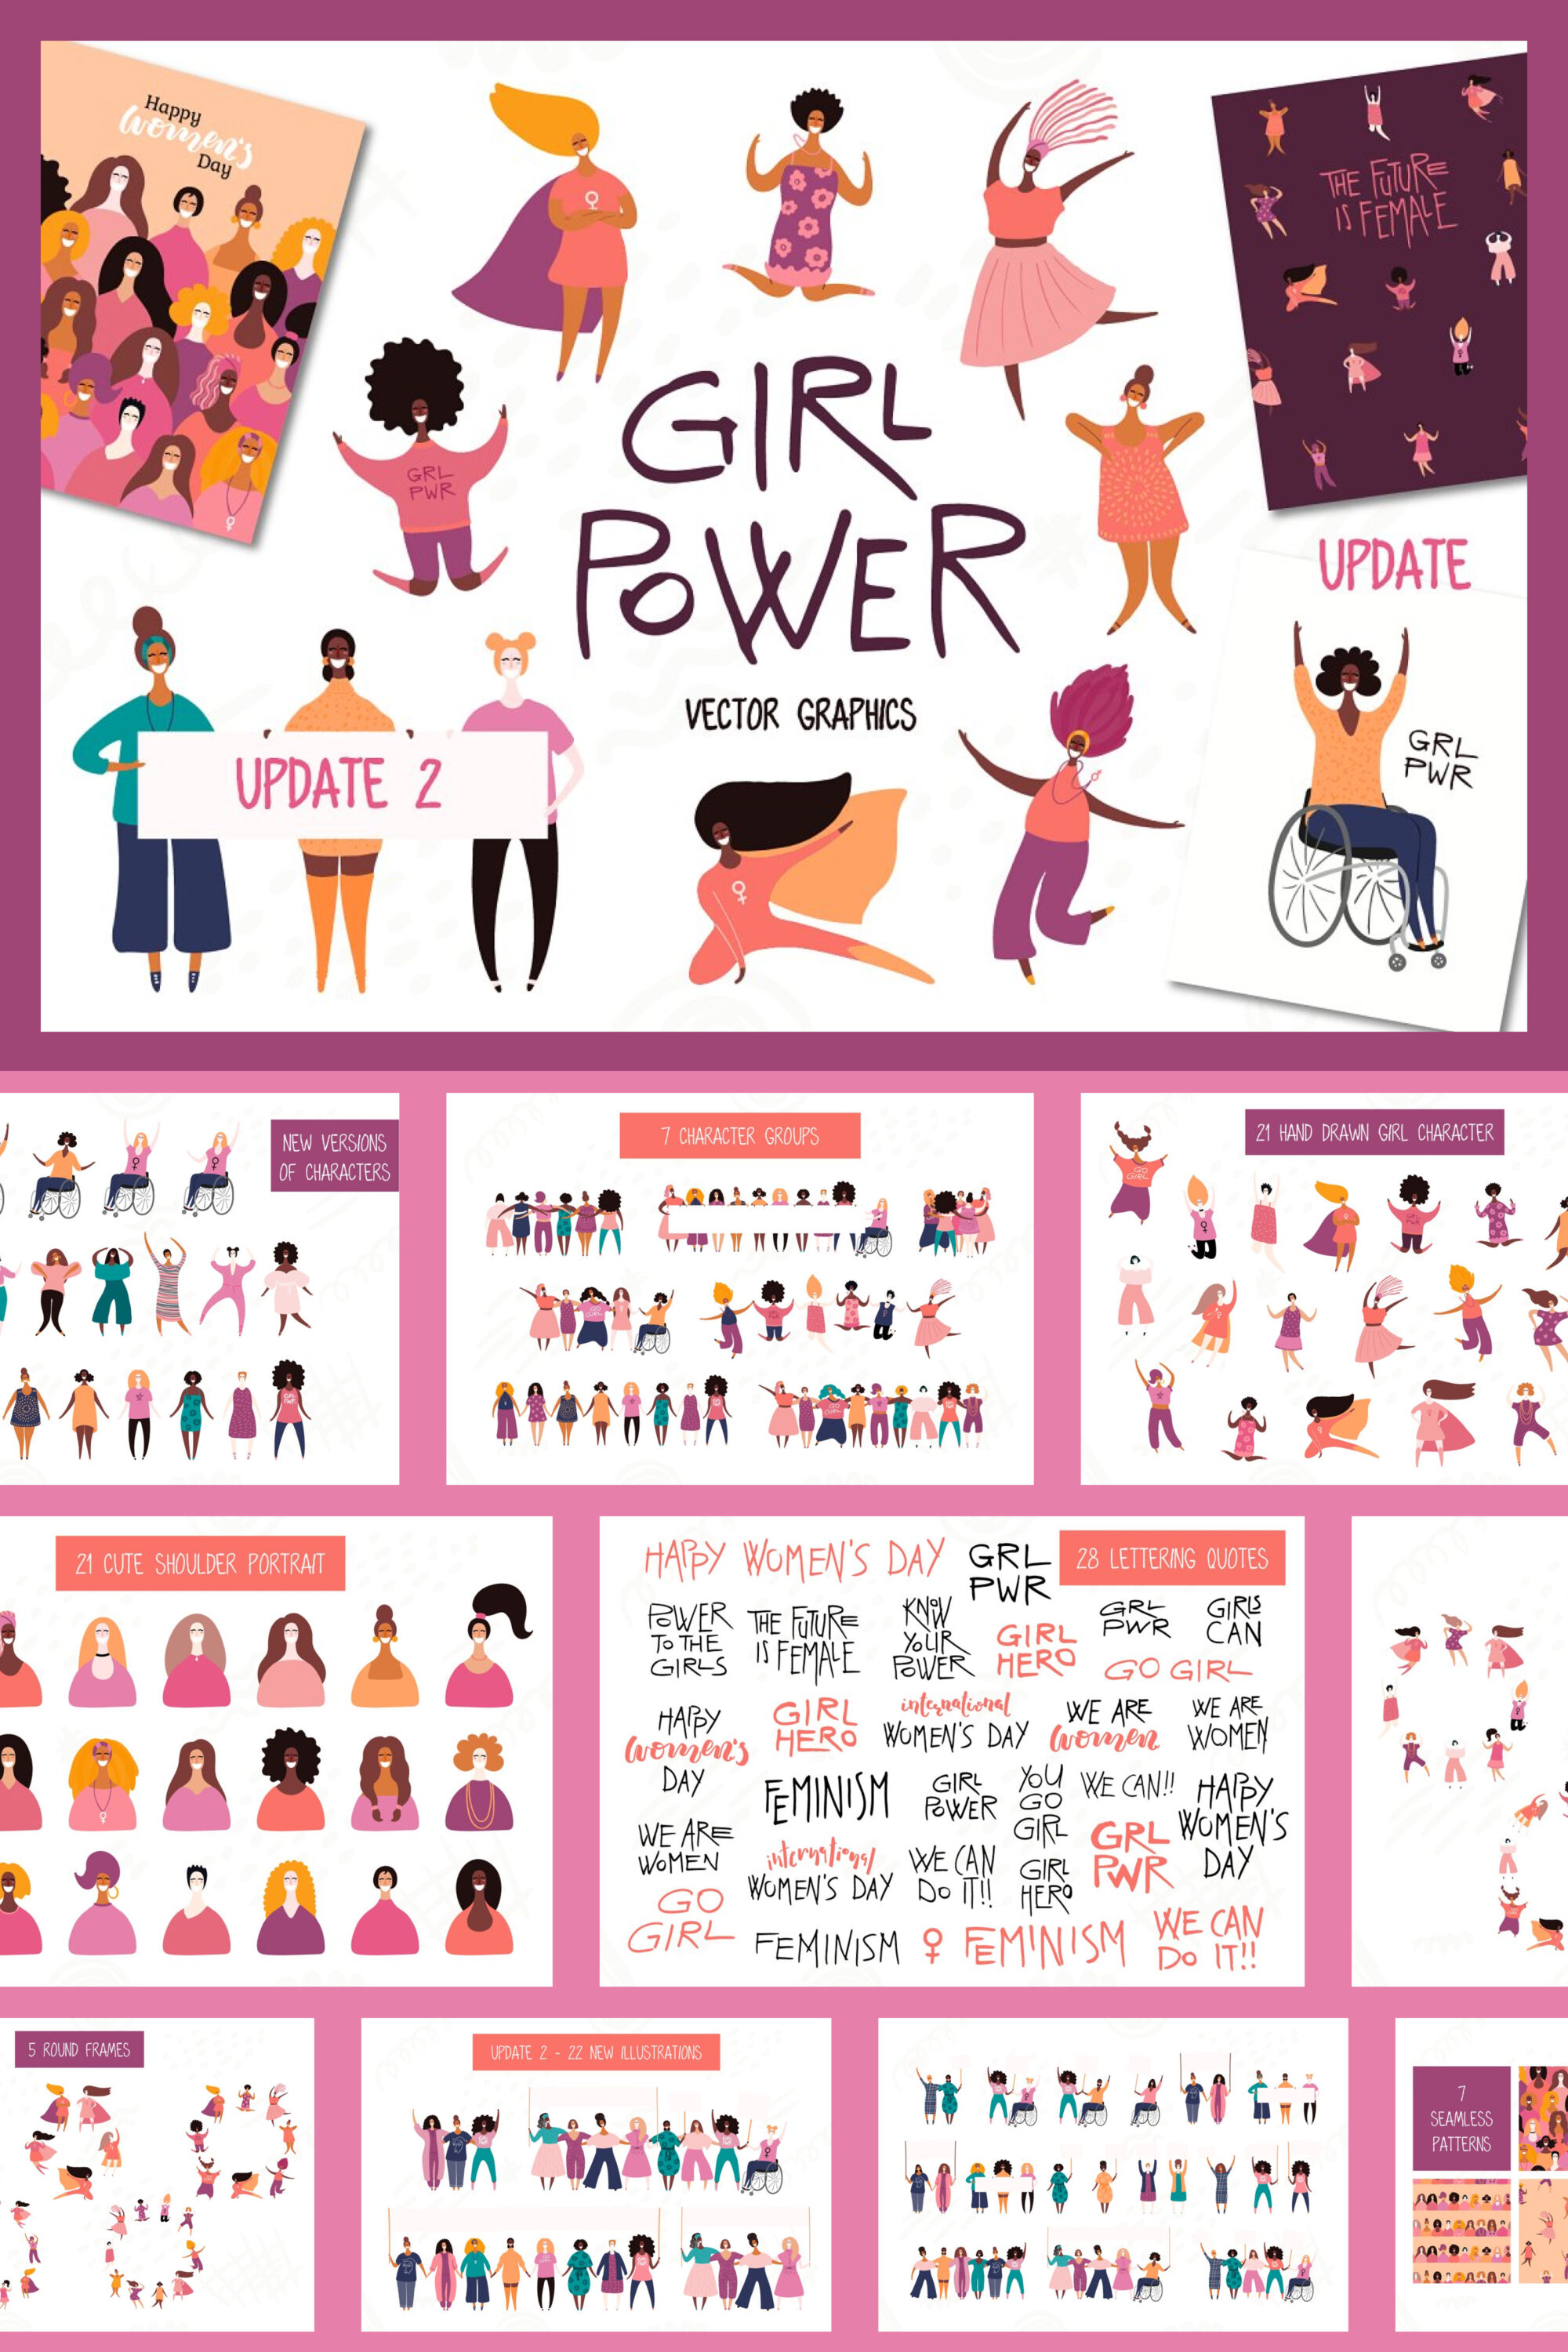 Girl power vector clipart quotes of pinterest.